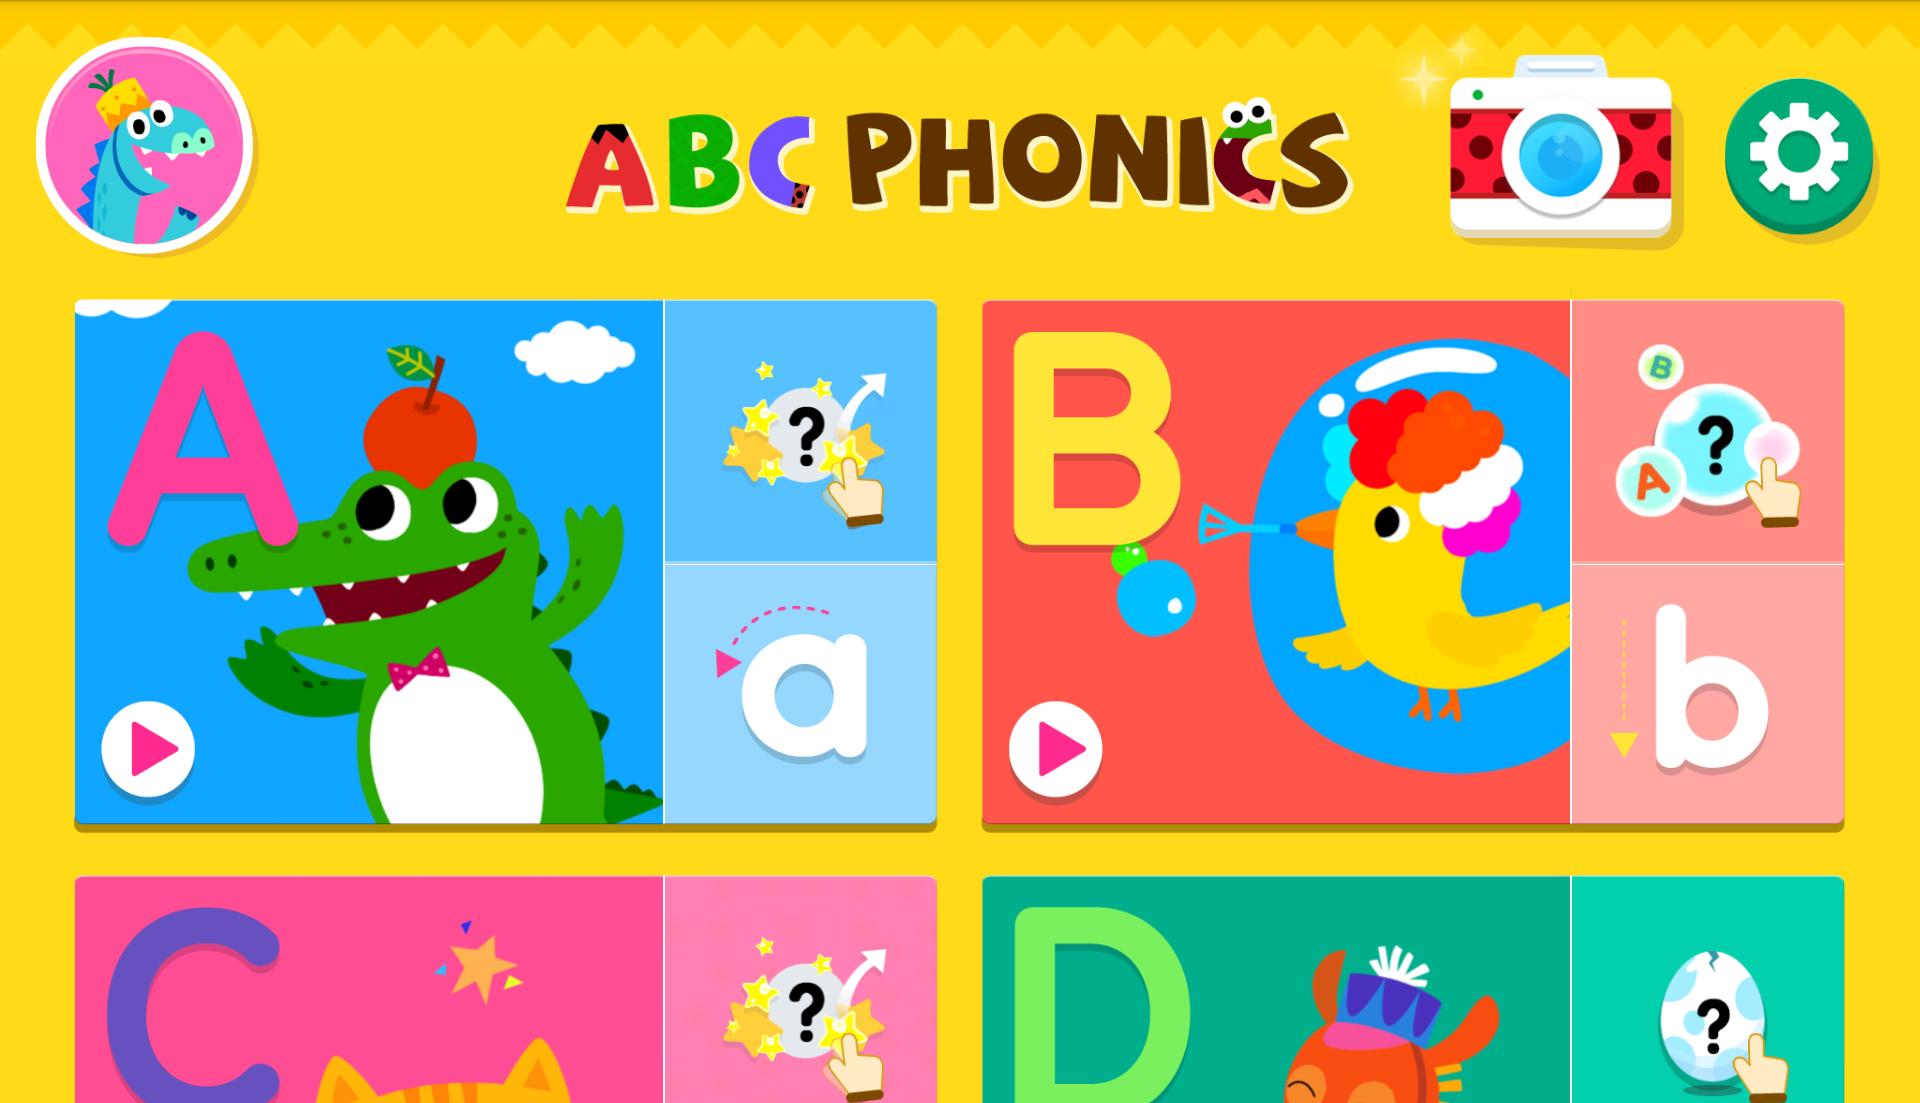 Pinkfong ABC Phonics for Android - APK Download